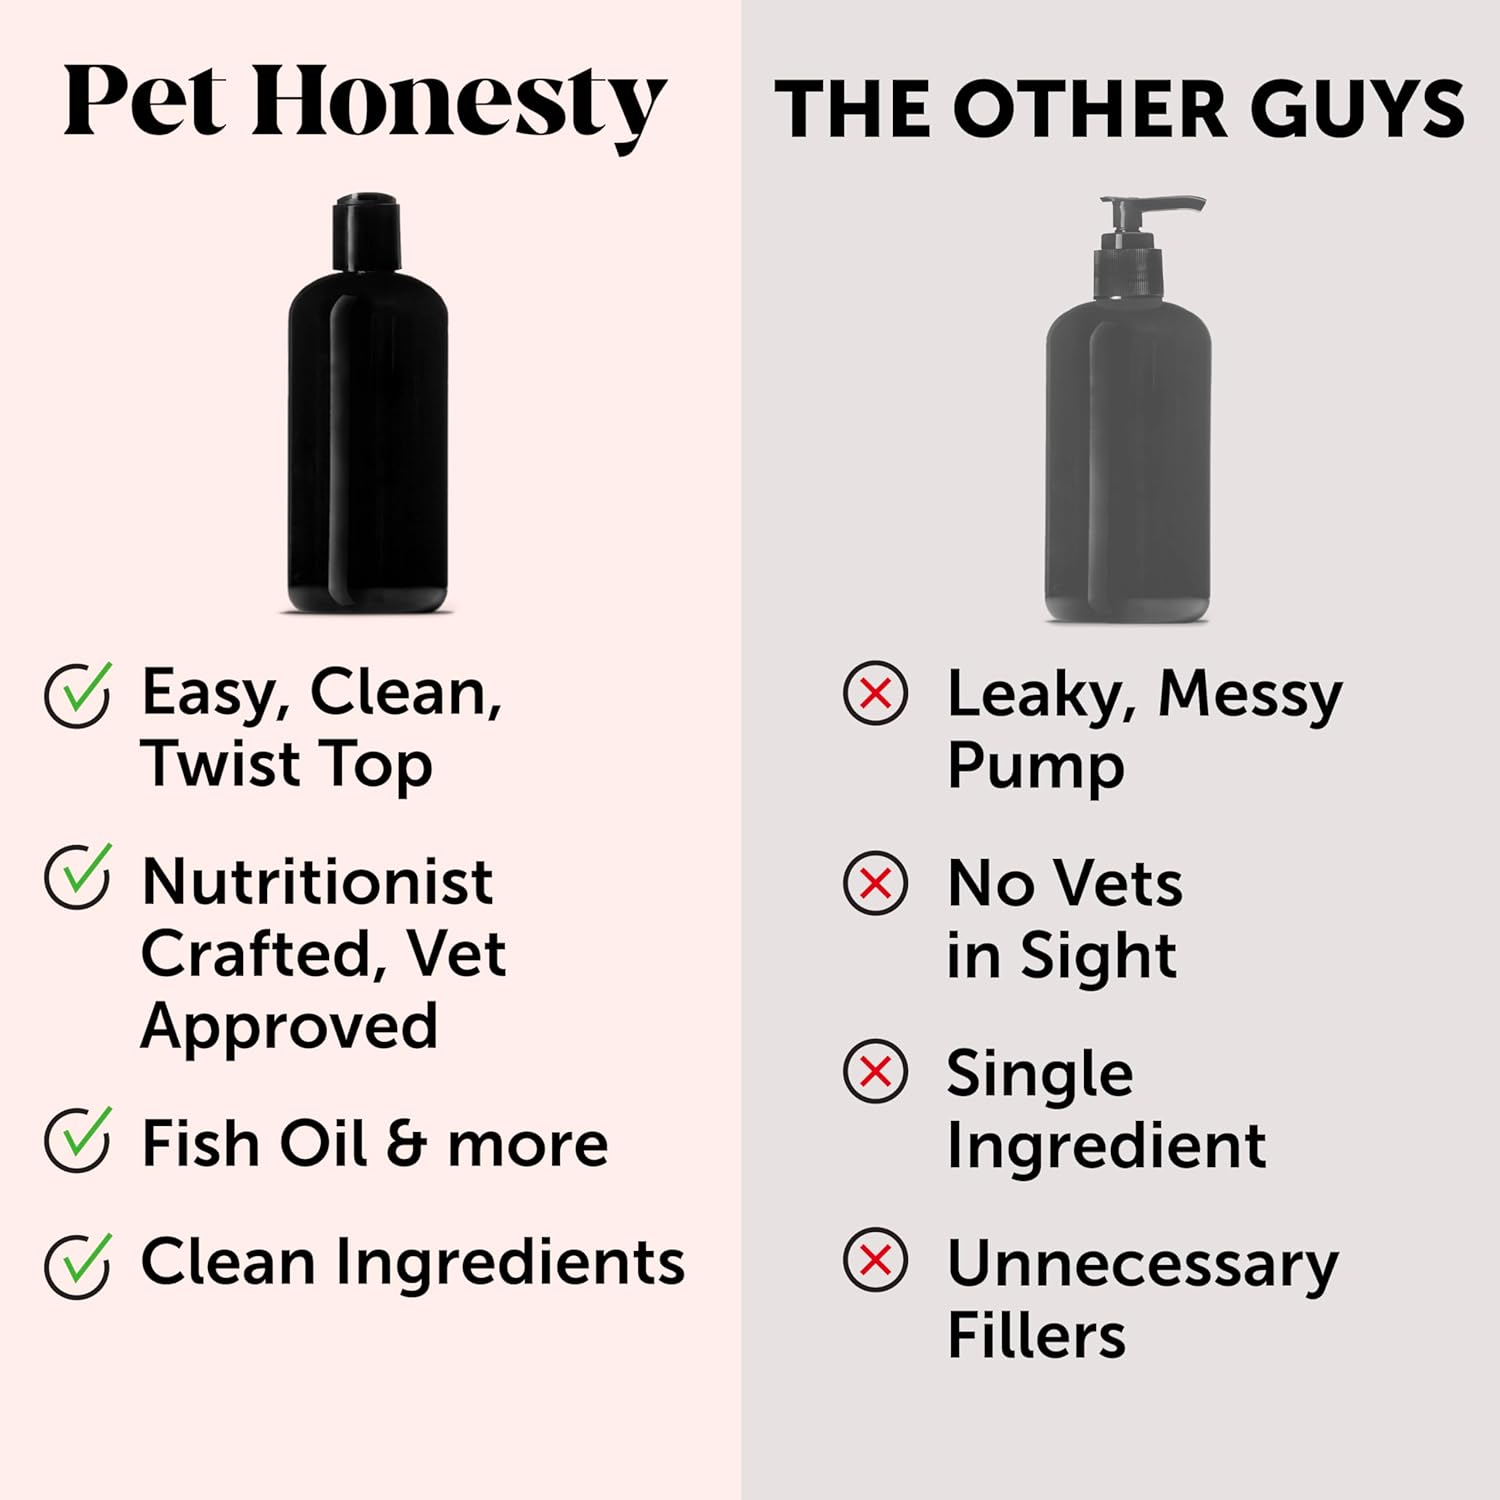 Pet Honesty Wild Alaskan Salmon Oil, Omega-3 Fish Oil for Dogs and Cats, Fatty Acids, Salmon Oil for Dogs, Skin and Coat Health, Pure Dog Food Topper, Supports Joints, Brain & Heart Health - 16 oz : Pet Supplies